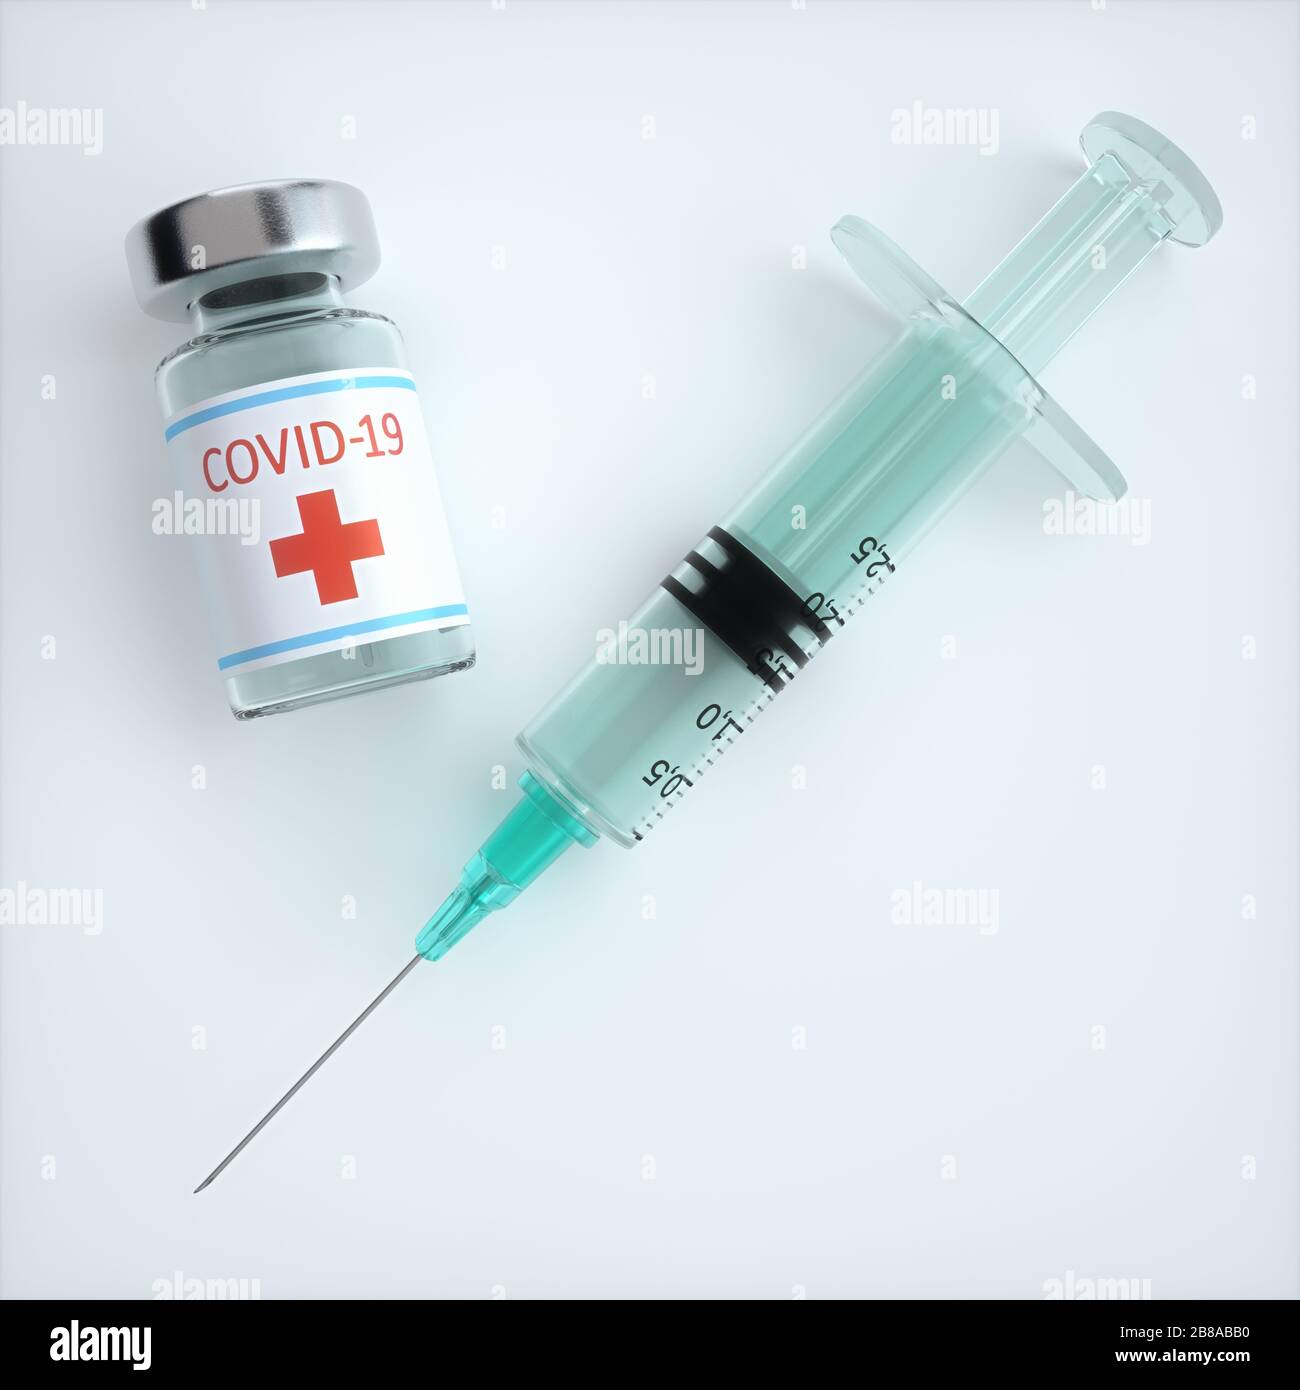 Conceptual image for the discovery of a vaccine for the Covid-19, Coronavirus, 2019-nCoV, SARS-CoV-2. Stock Photo